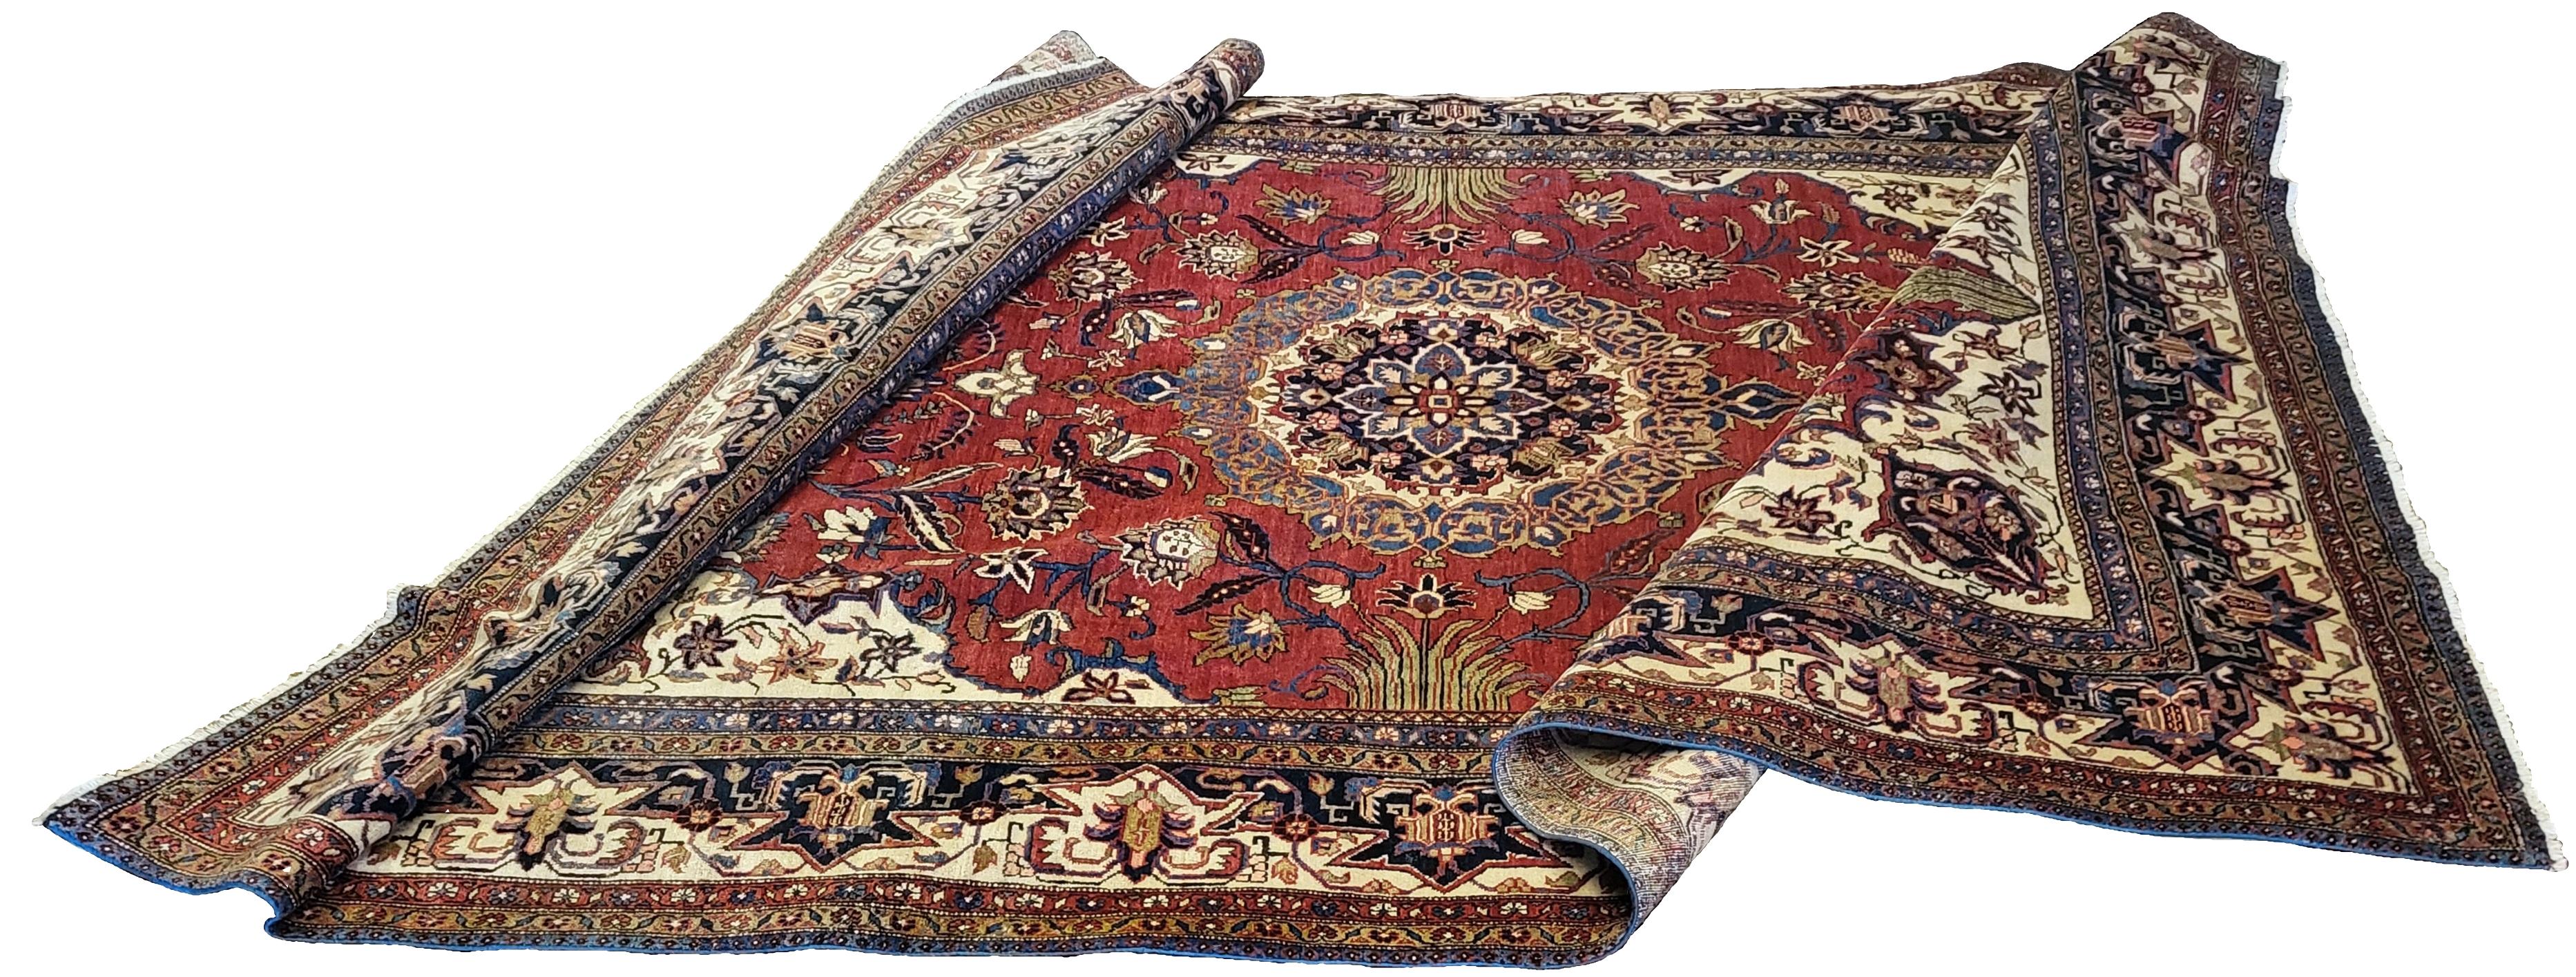 20th Century Rare / One of a Kind - Semi Antique Persian Heriz - Serapi - PRG Exclusive For Sale